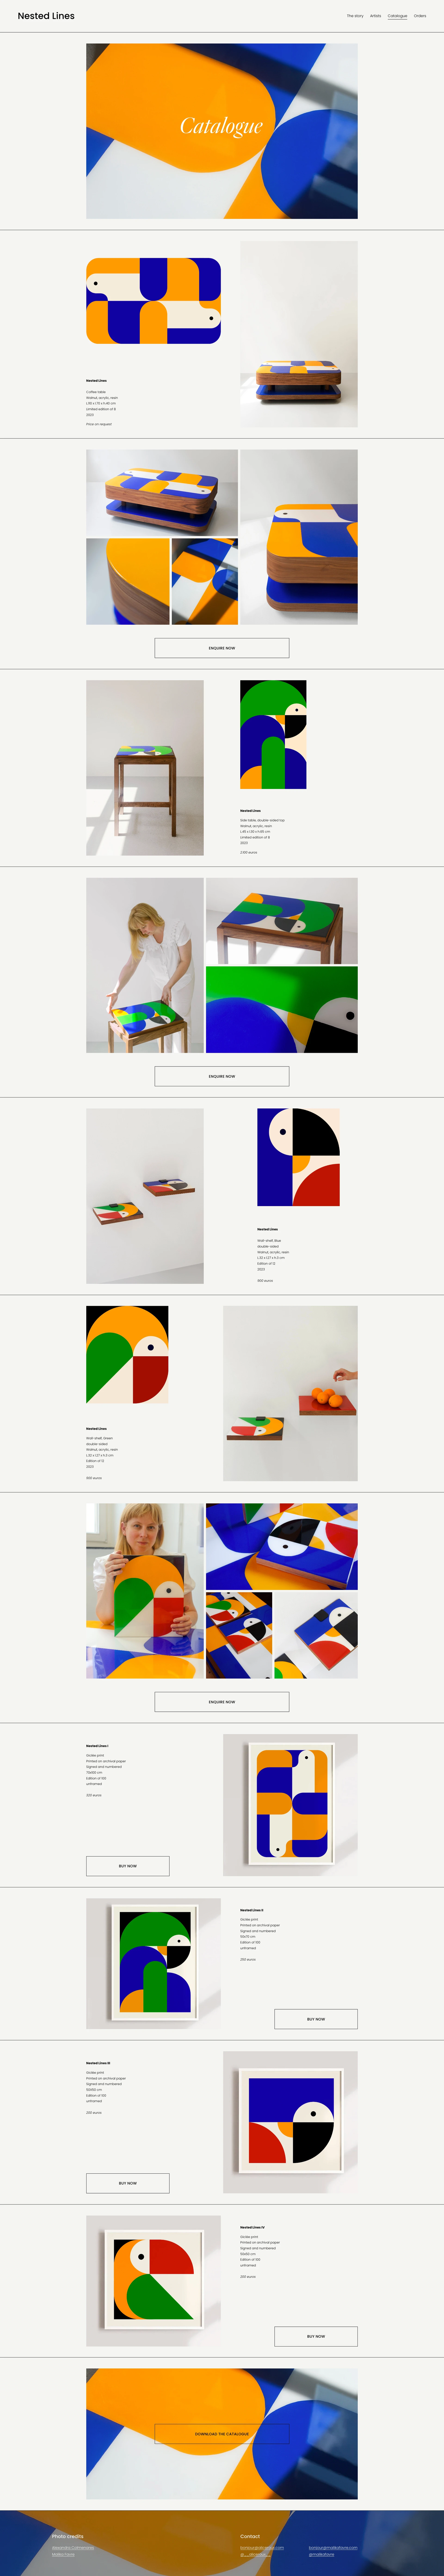 Nested Lines Landing Page Example: Nested Lines is a collaboration from illustrator Malika Favre and artist Alice Roux born from a mutual love for colours, objects and beauty.